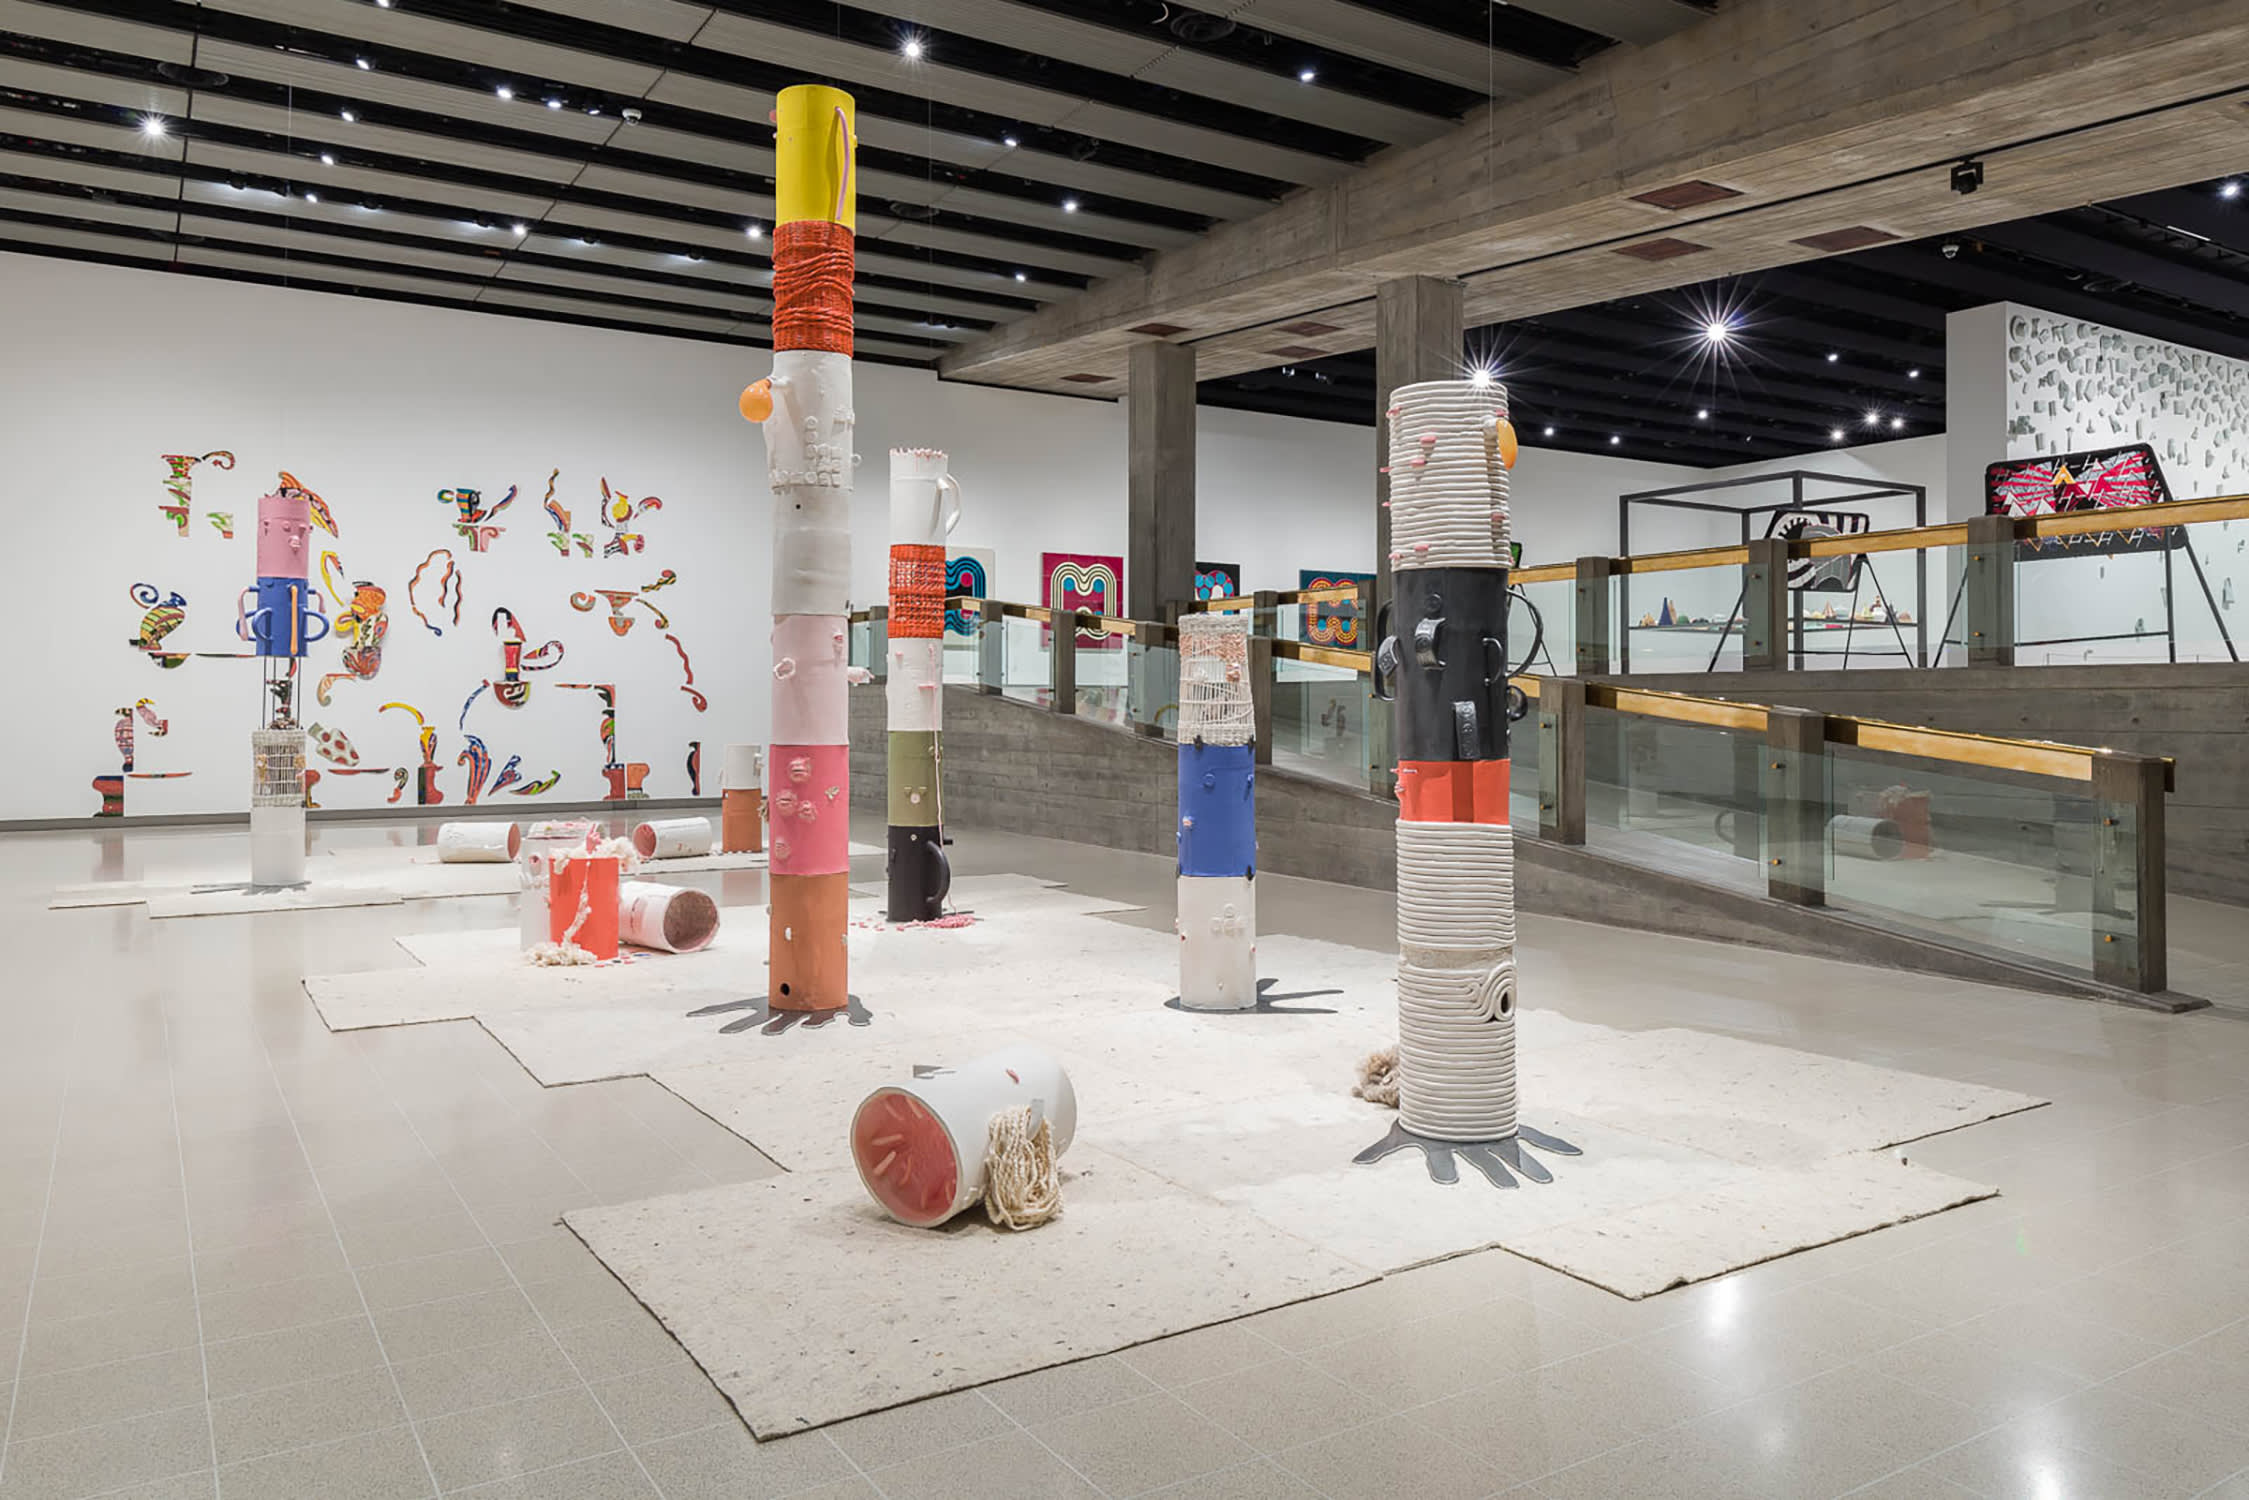 Installation view of works by Jonathan Baldock and Rachel Kneebone in the exhibition ‘Strange Clay: Ceramics in Contemporary Art’, Hayward Gallery, London, 2022–2023. Photo by Mark Blower. Courtesy of the Hayward Gallery.